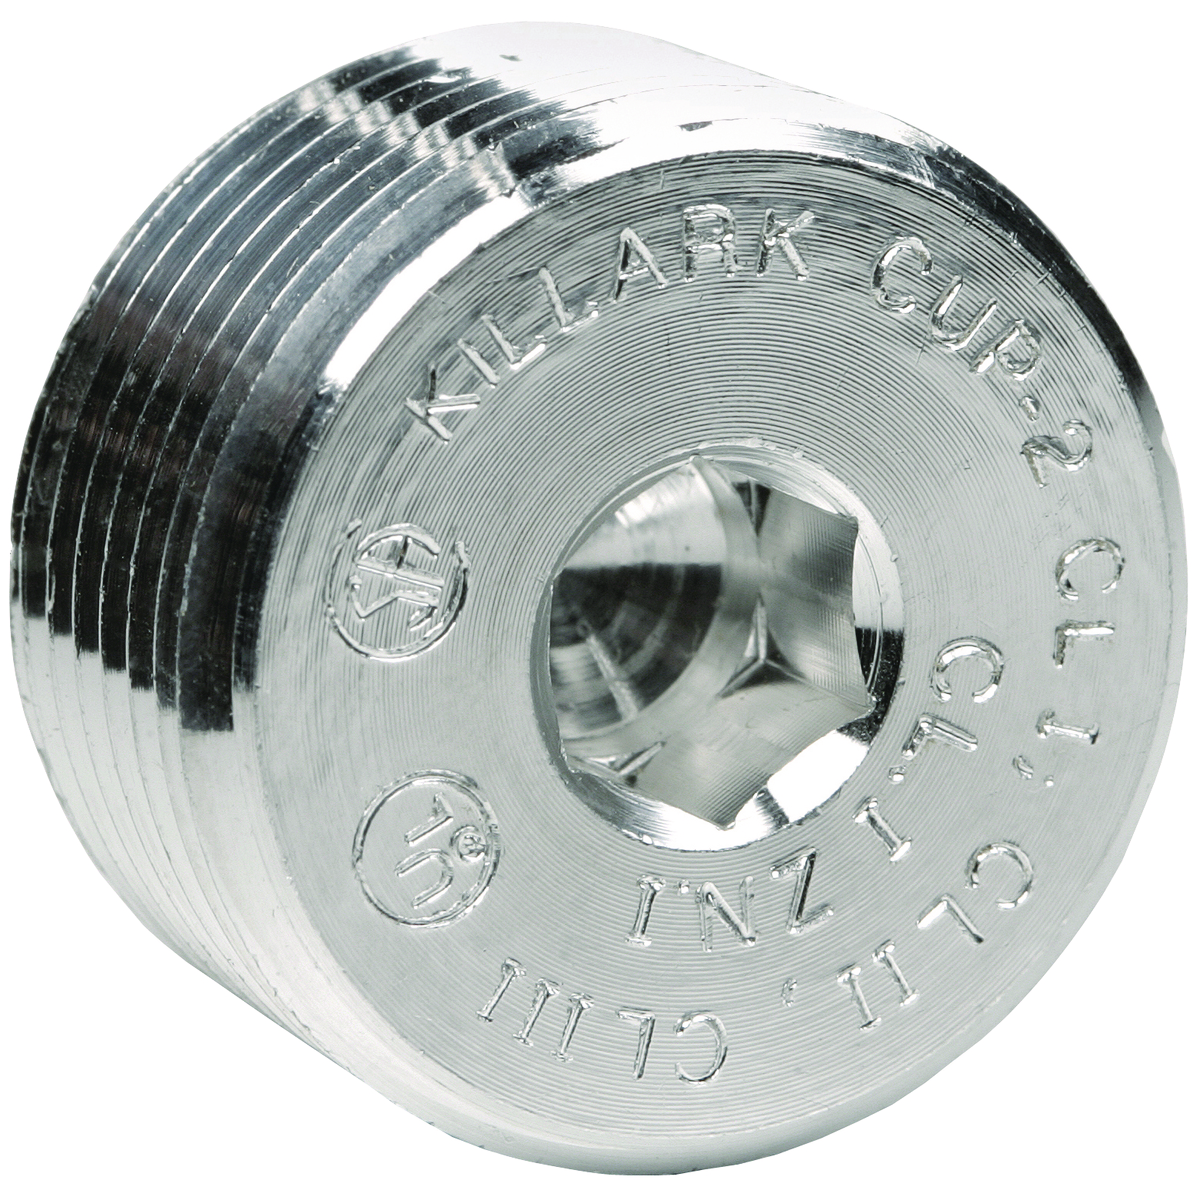 CUP SERIES FITTINGS - ALUMINUM - RECESSED PLUG - HUB SIZE 1 IN